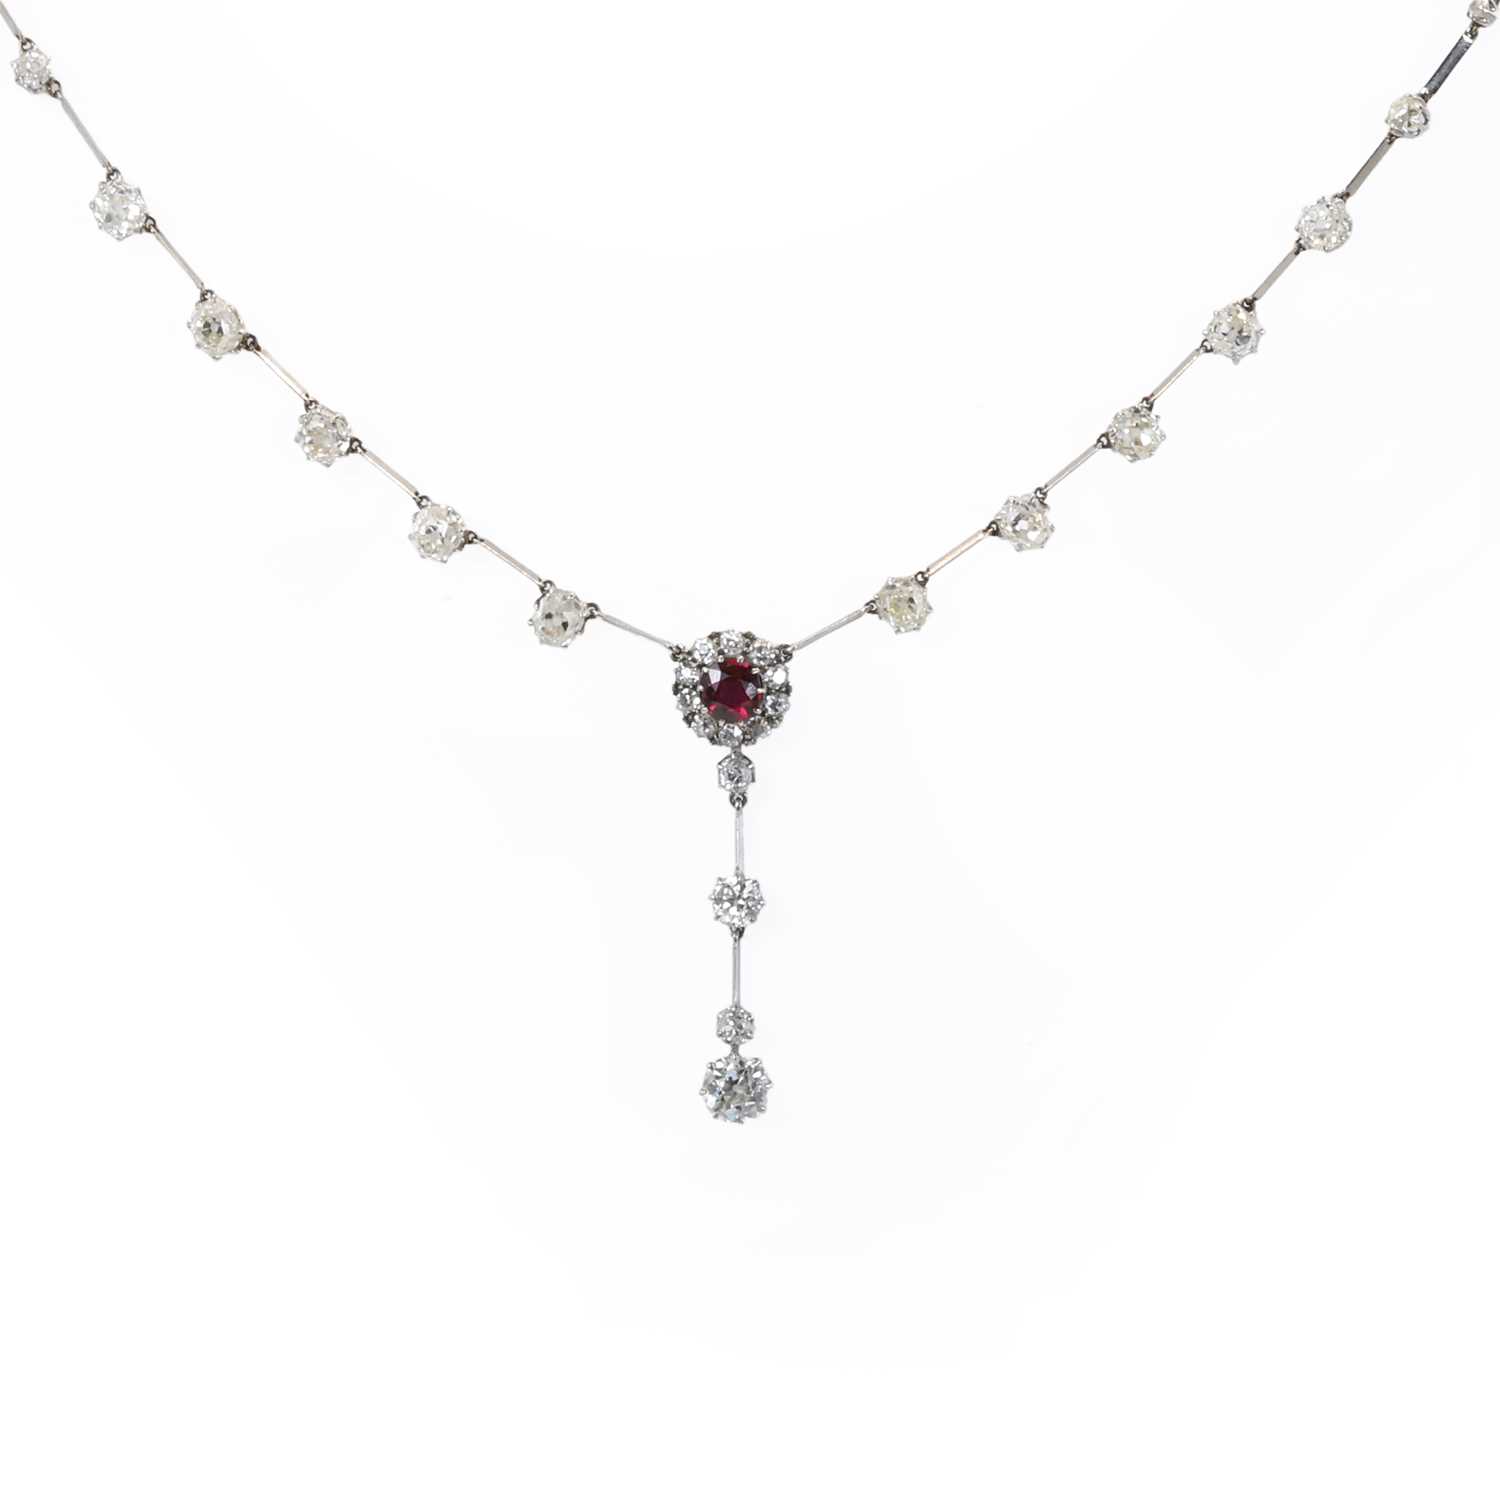 A diamond and ruby necklace, c.1915, - Image 2 of 3